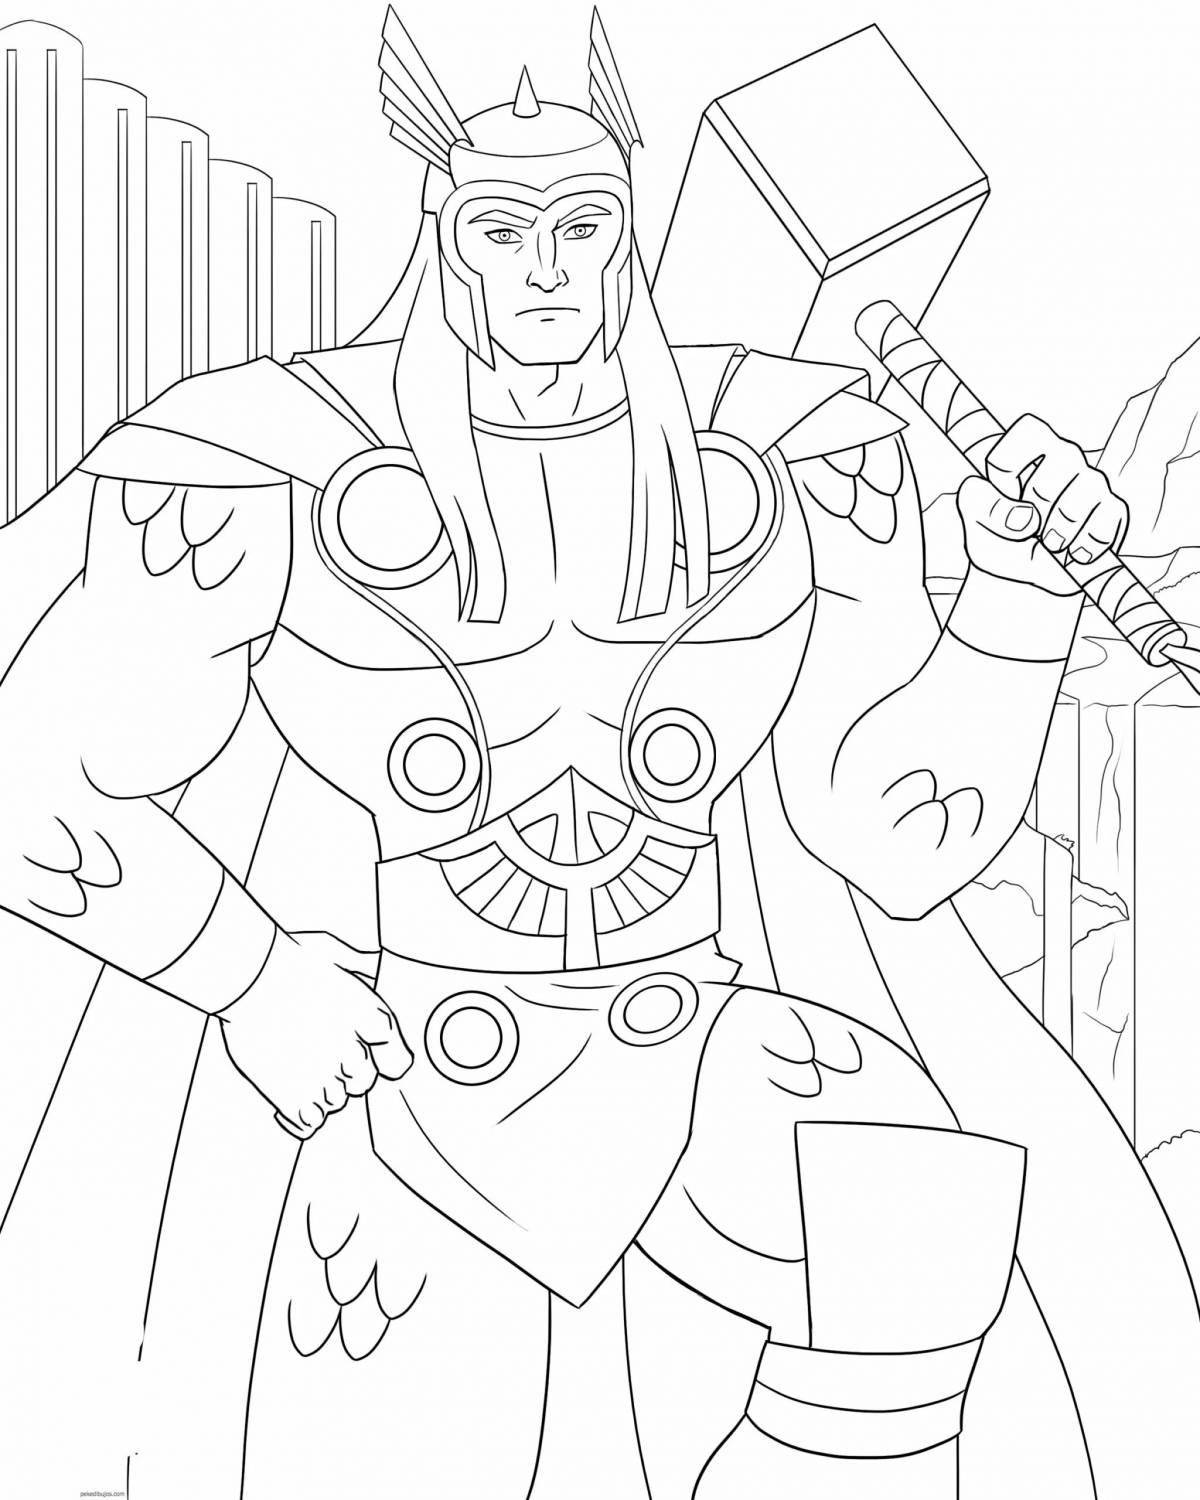 Magic Thor coloring book for kids